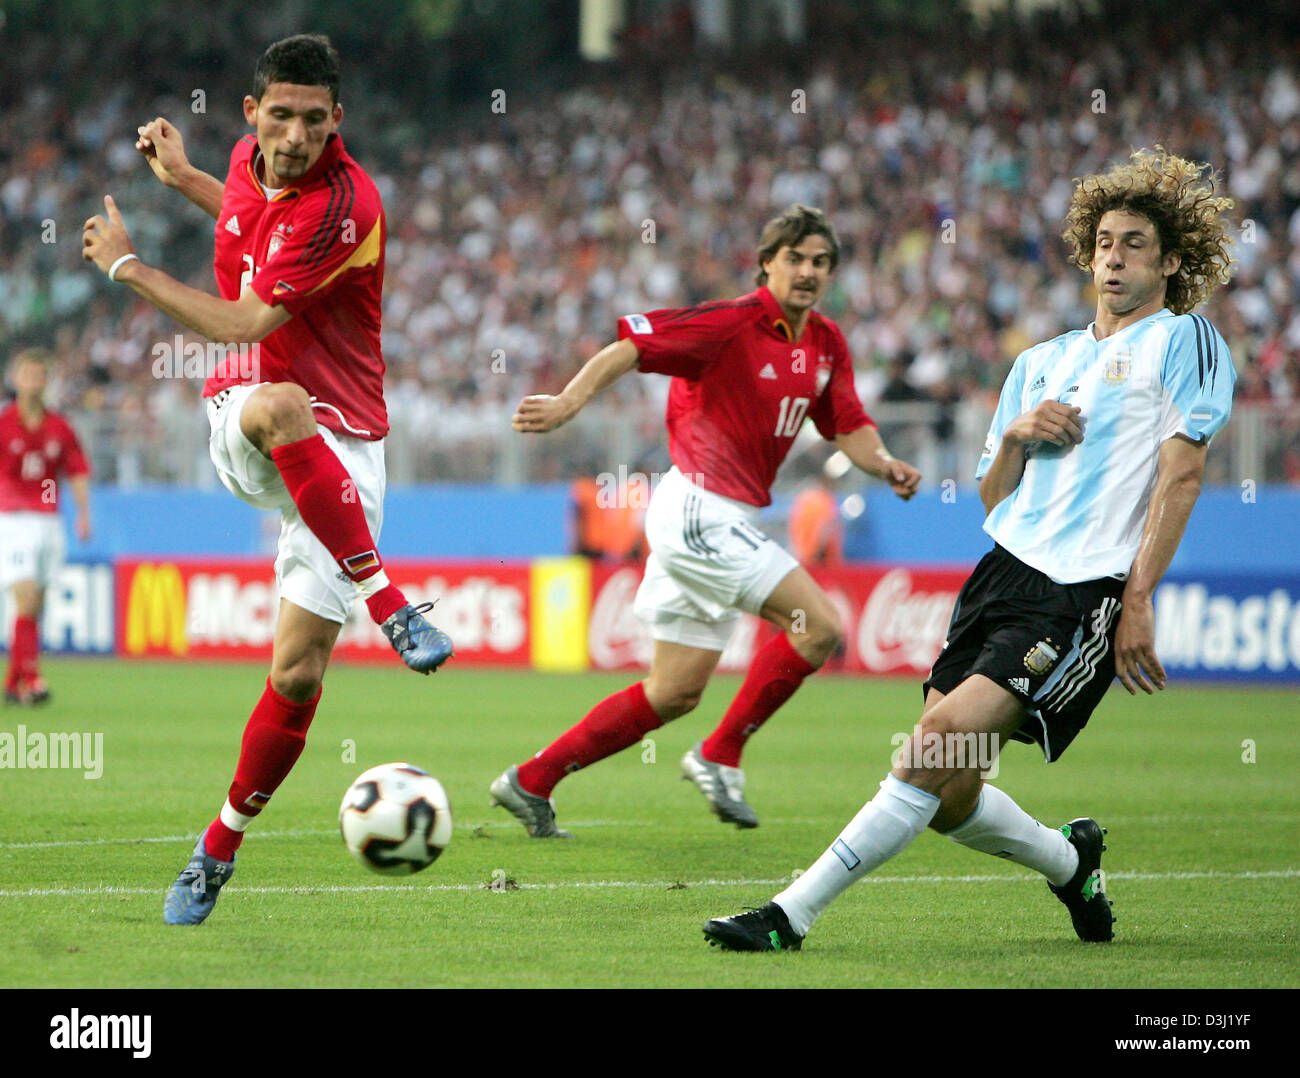 (dpa) - German soccer player Kevin Kuranyi (L) tries to score despite the presence of Argentinian defender Fabricio Coloccini (R) during their match at the FIFA Confederations Cup 2005 at the Franken-Stadium in Nuremberg, Germany, 21 June 2005. In the back watches German Sebastian Deisler (C) the situation. The match ended in a 2-2 draw. Stock Photo